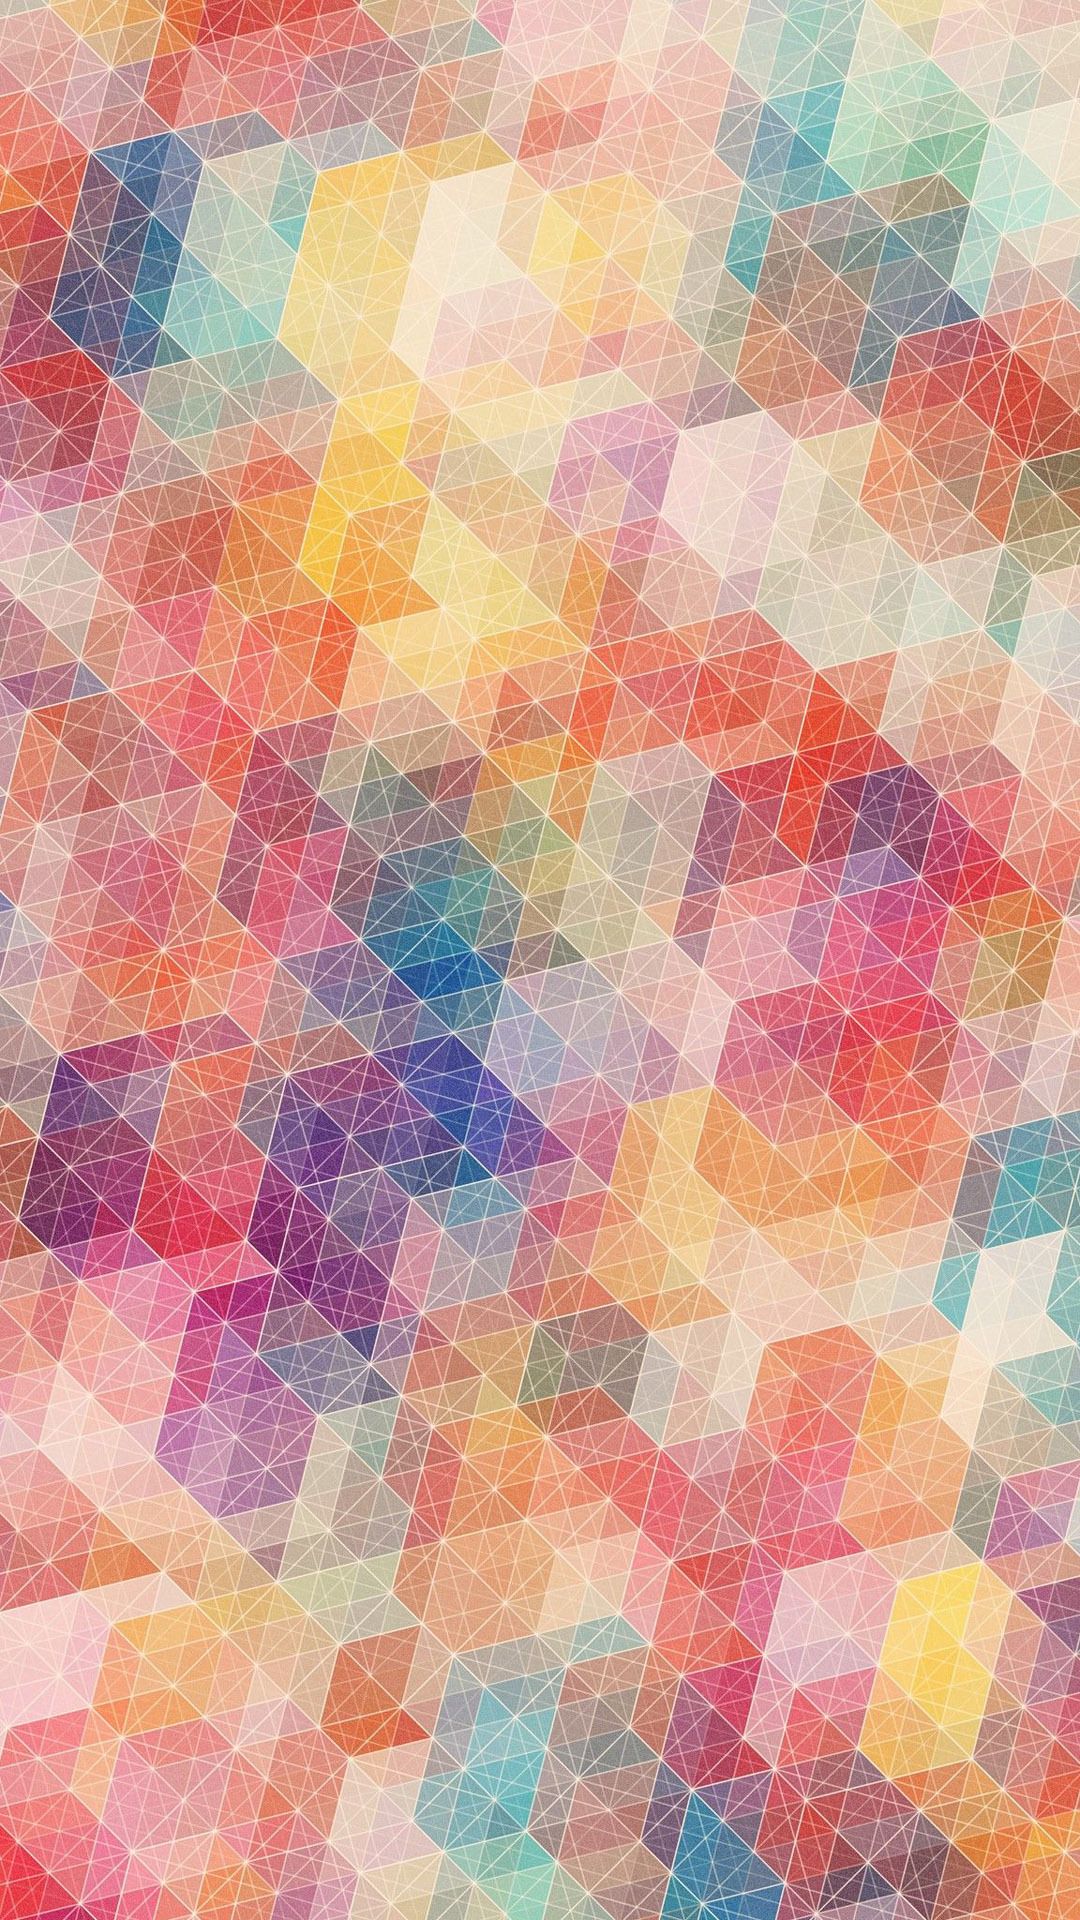 Pastel geometry htc one wallpaper, free and easy to download